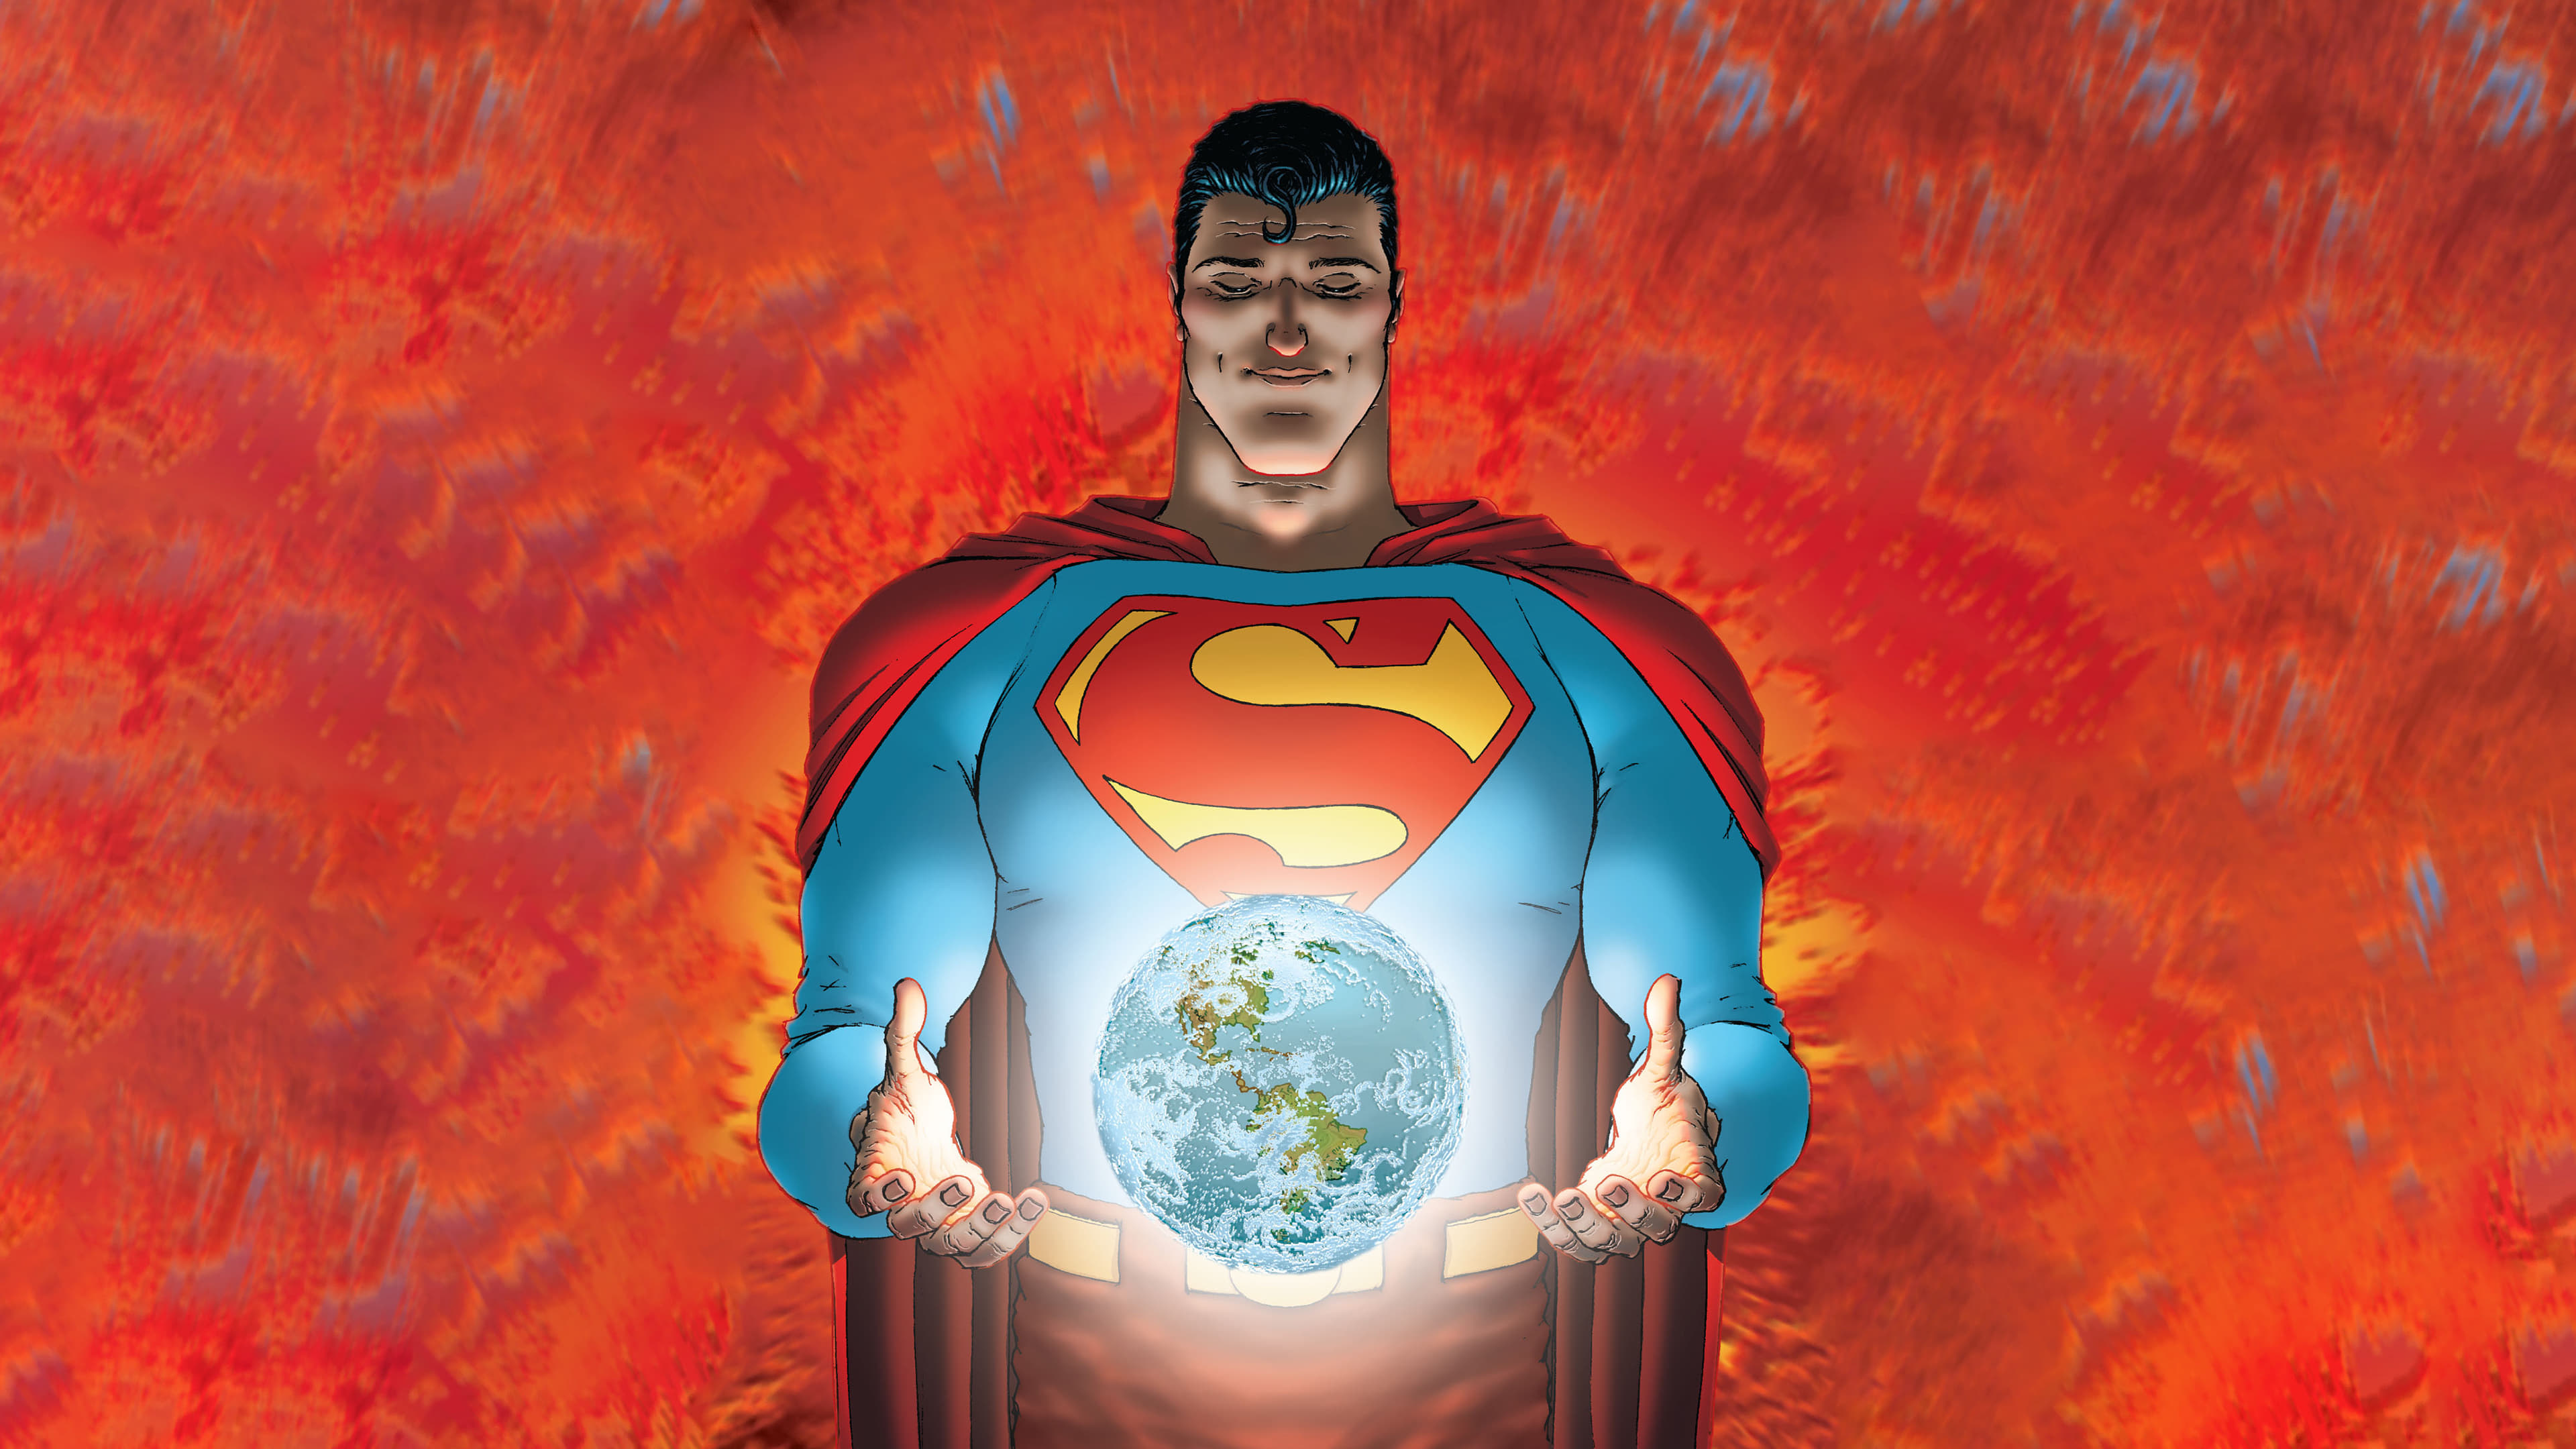 DC All-Star Superman Wallpaper, HD Superheroes 4K Wallpapers, Images,  Photos and Background - Wallpapers Den